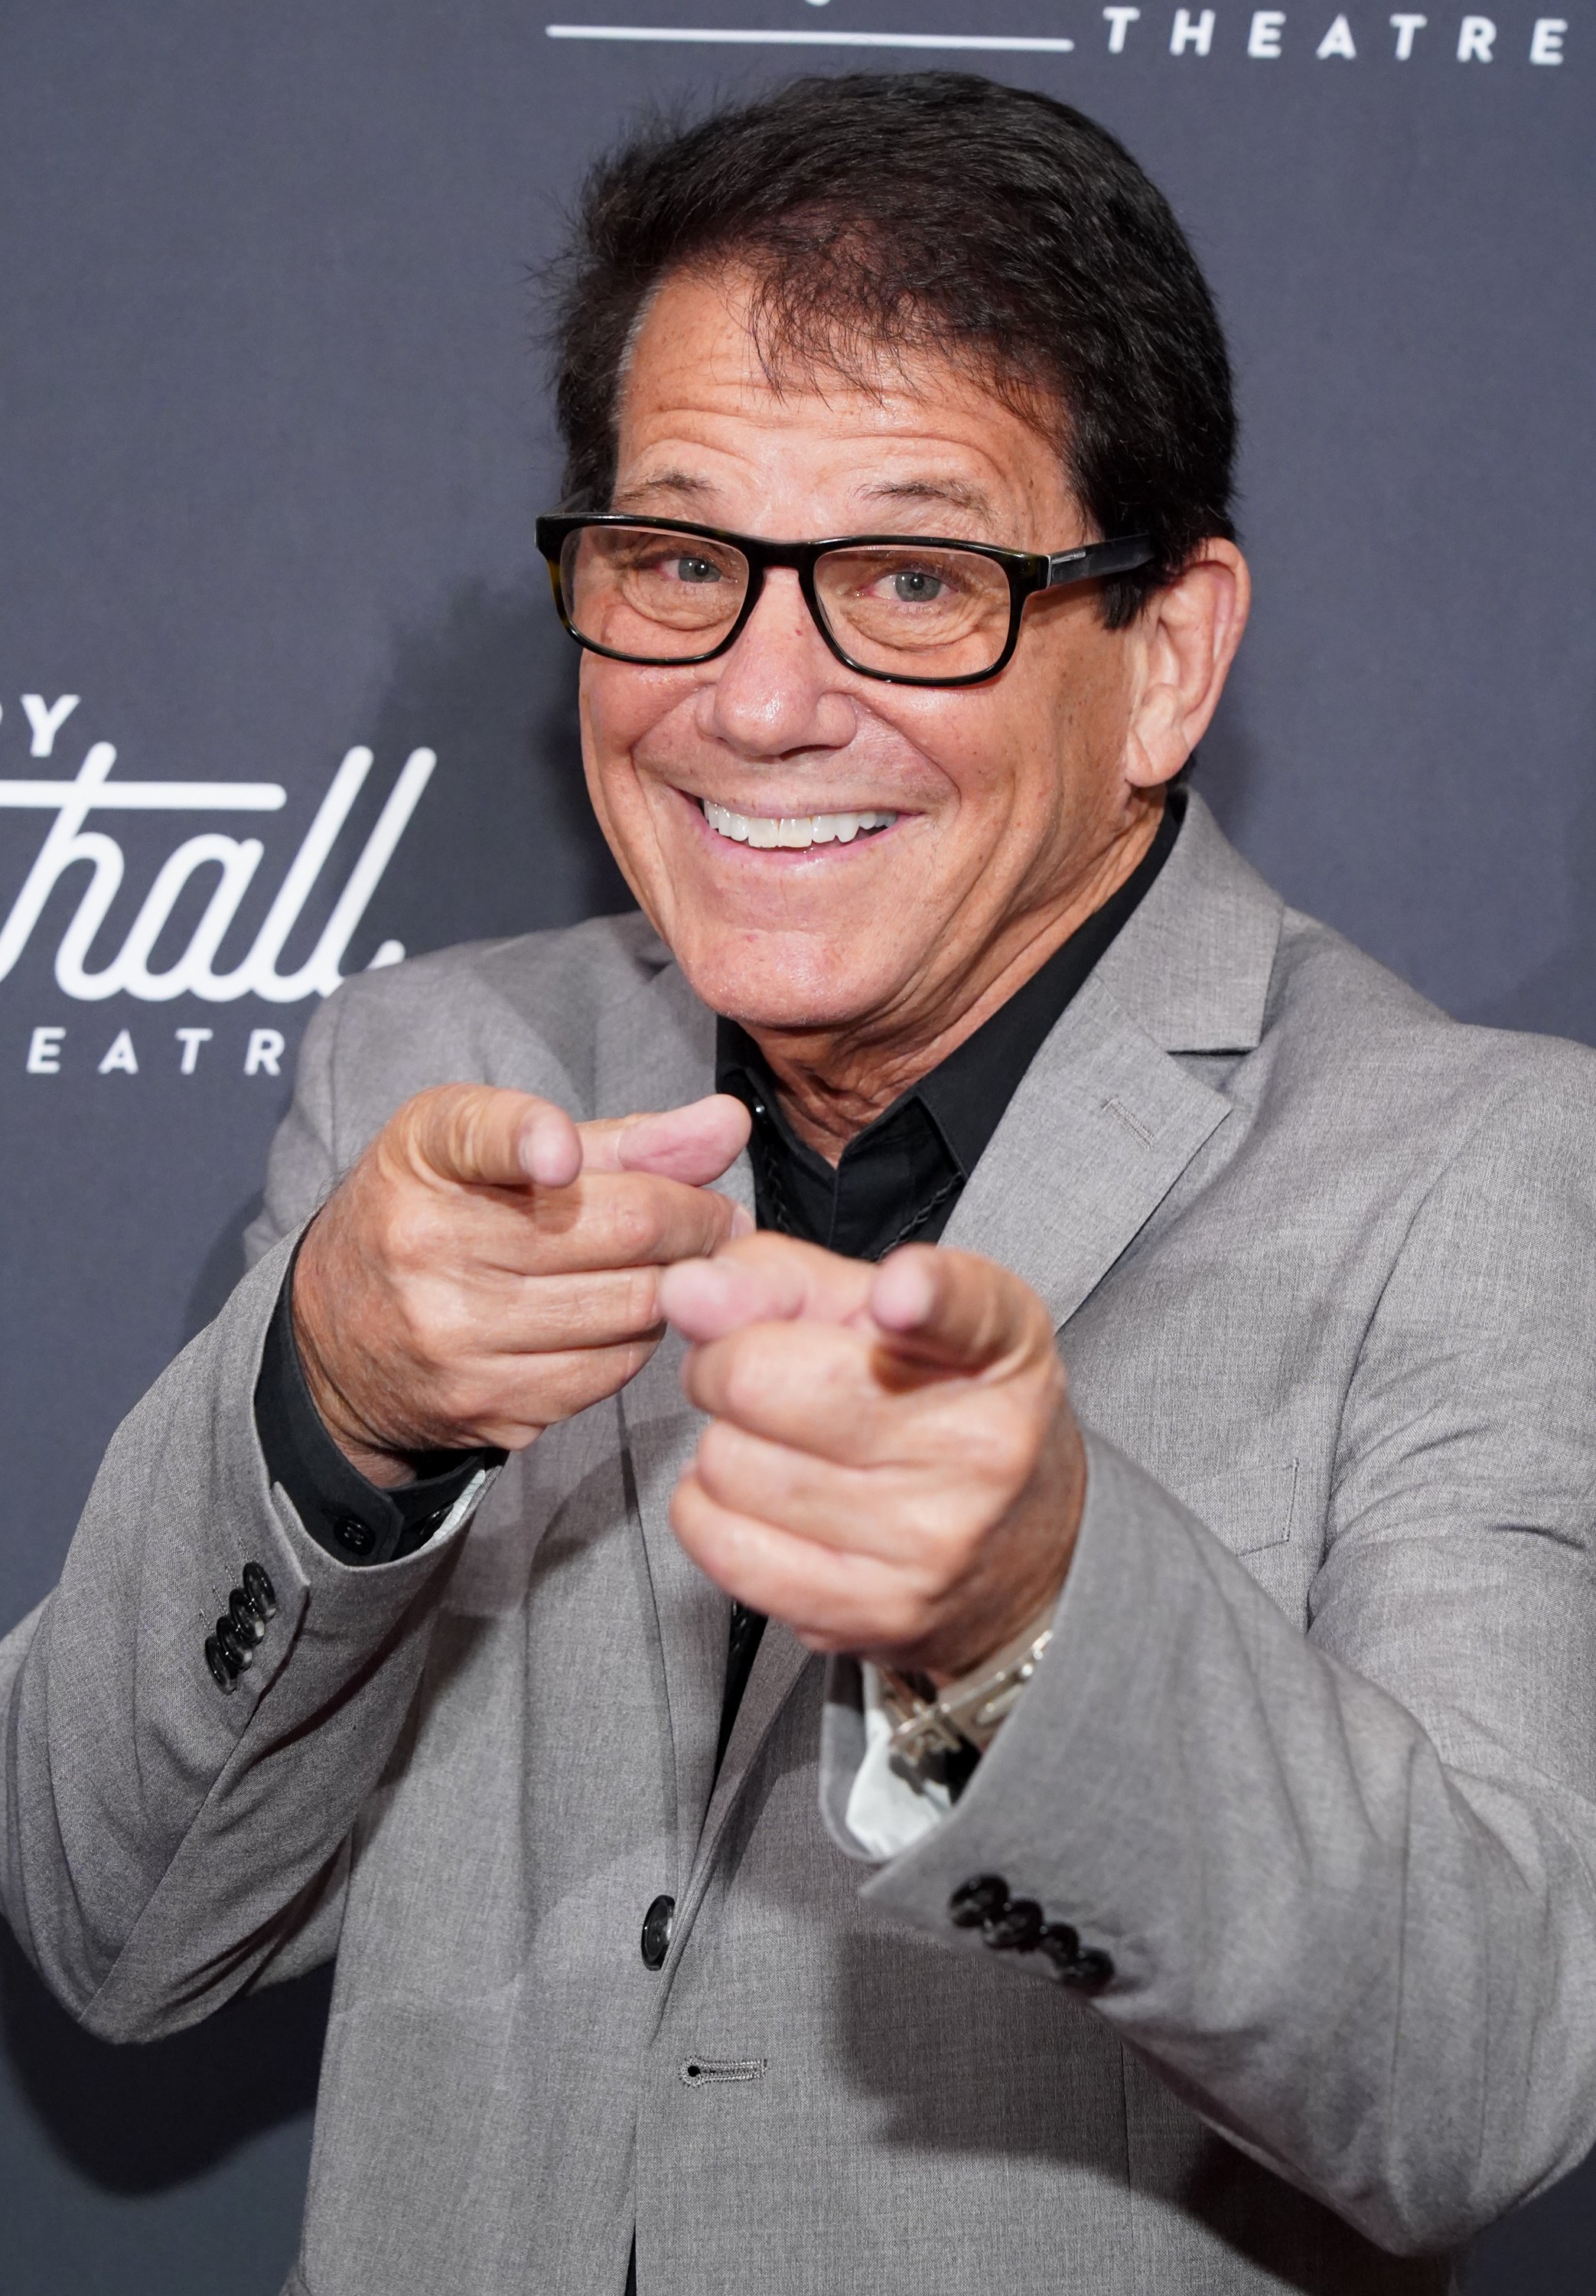 Anson Williams in California in 2019. | Source: Getty Images